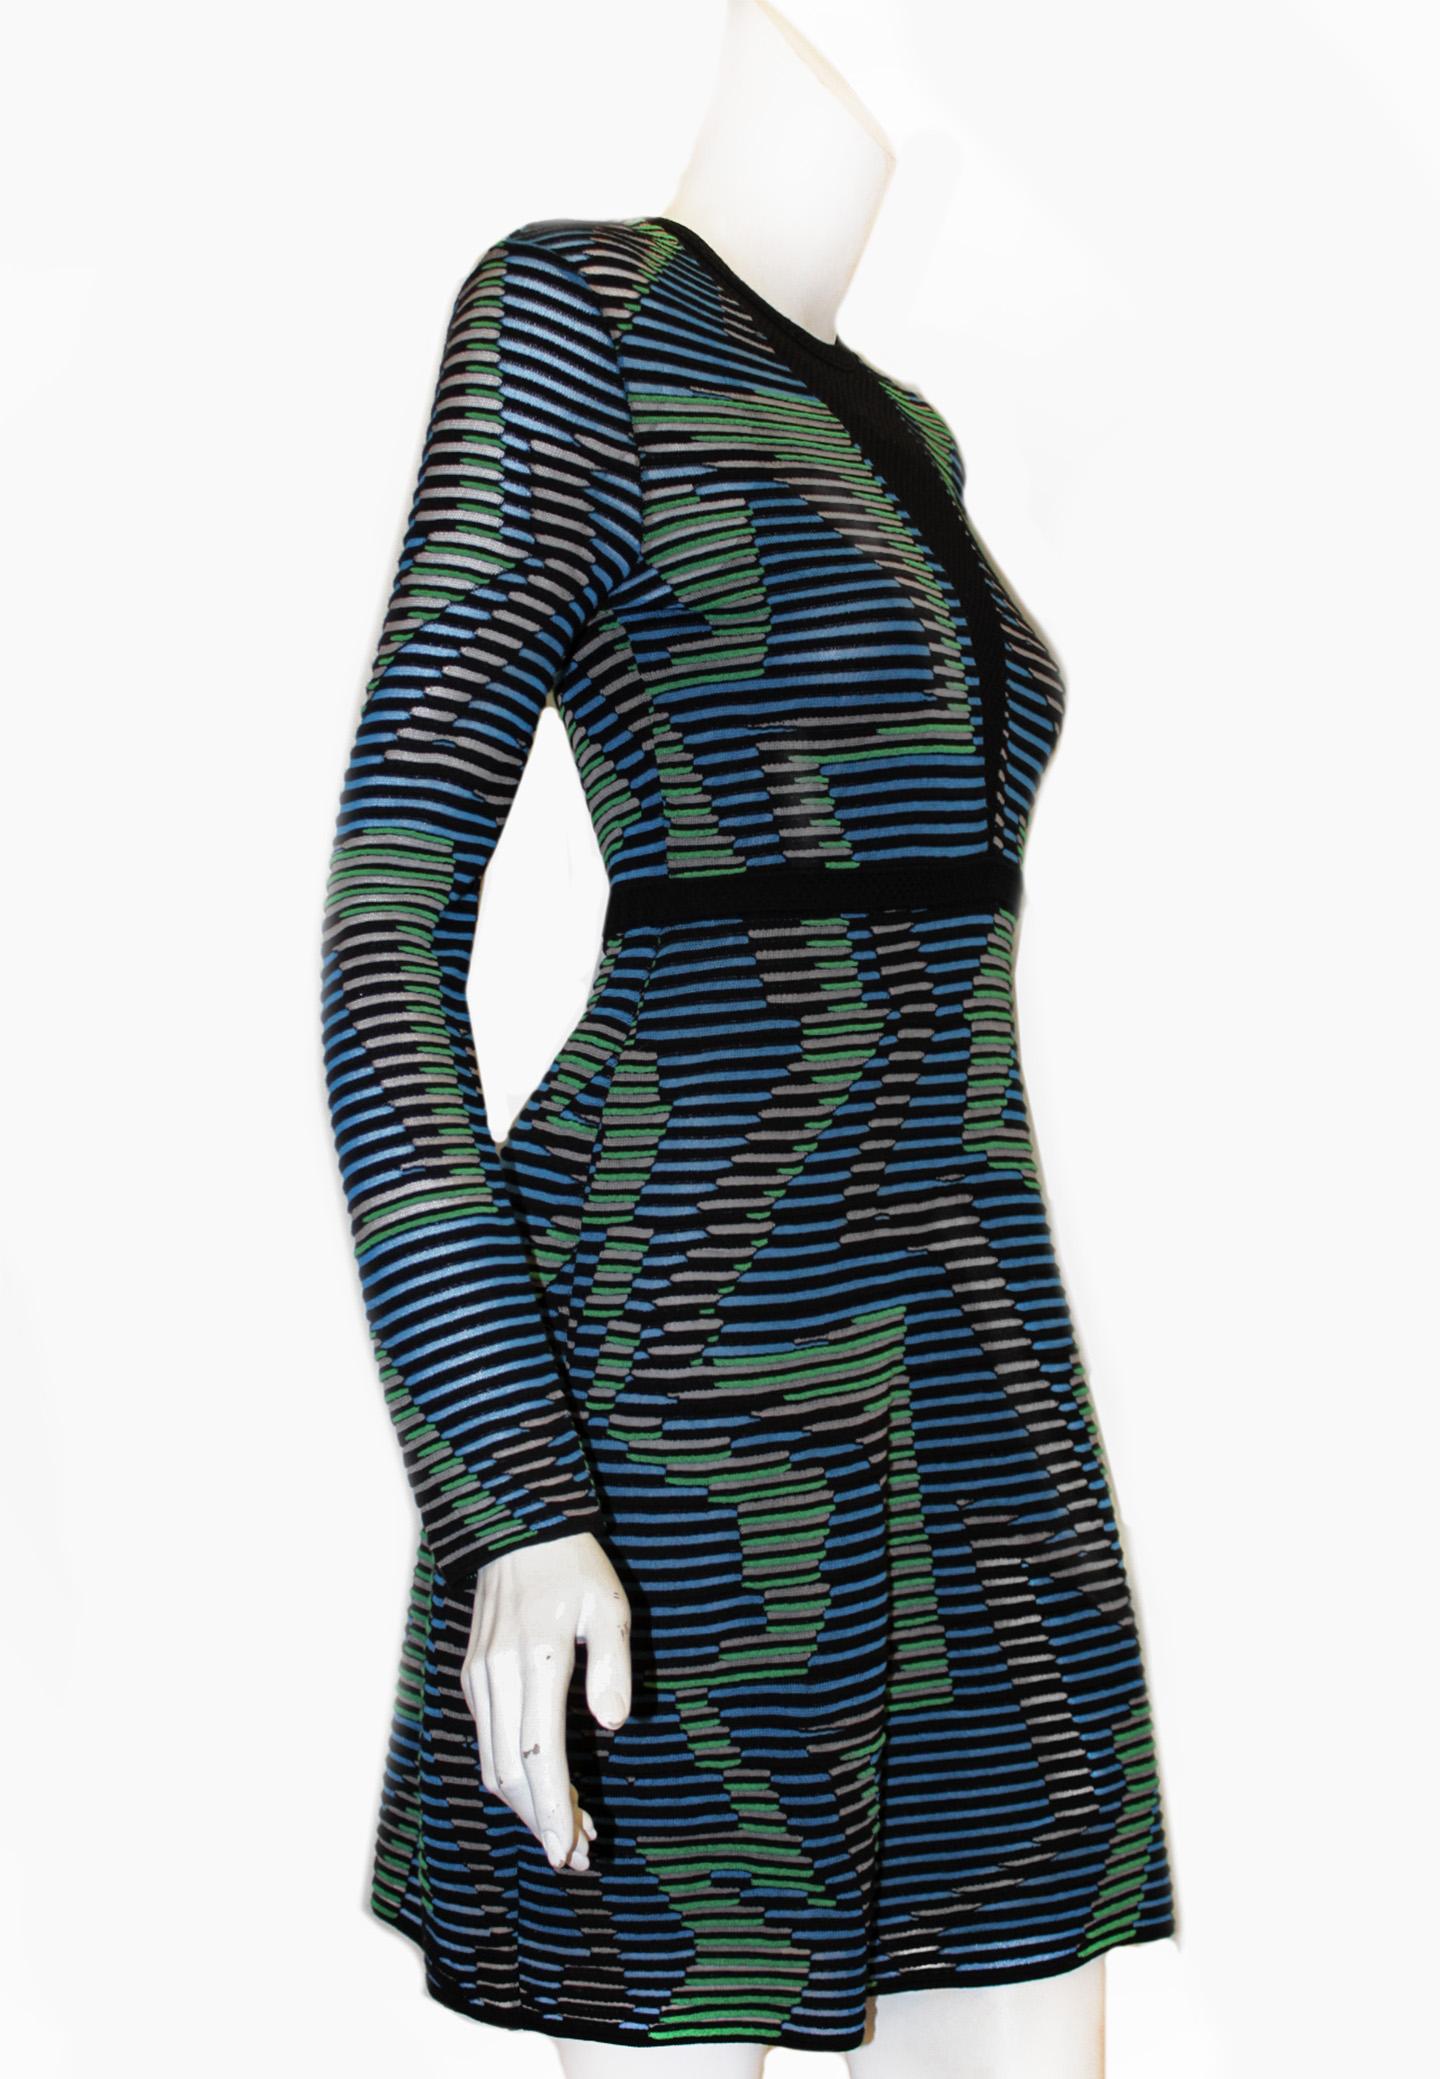 Missoni multi color knit dress conceptual zig zag design in black, turquoise blue and green is authentic to the Missoni brand.  With an open knit neckline in black from neck to waist, intensifies the quirky and forceful concept.  The dress slips on